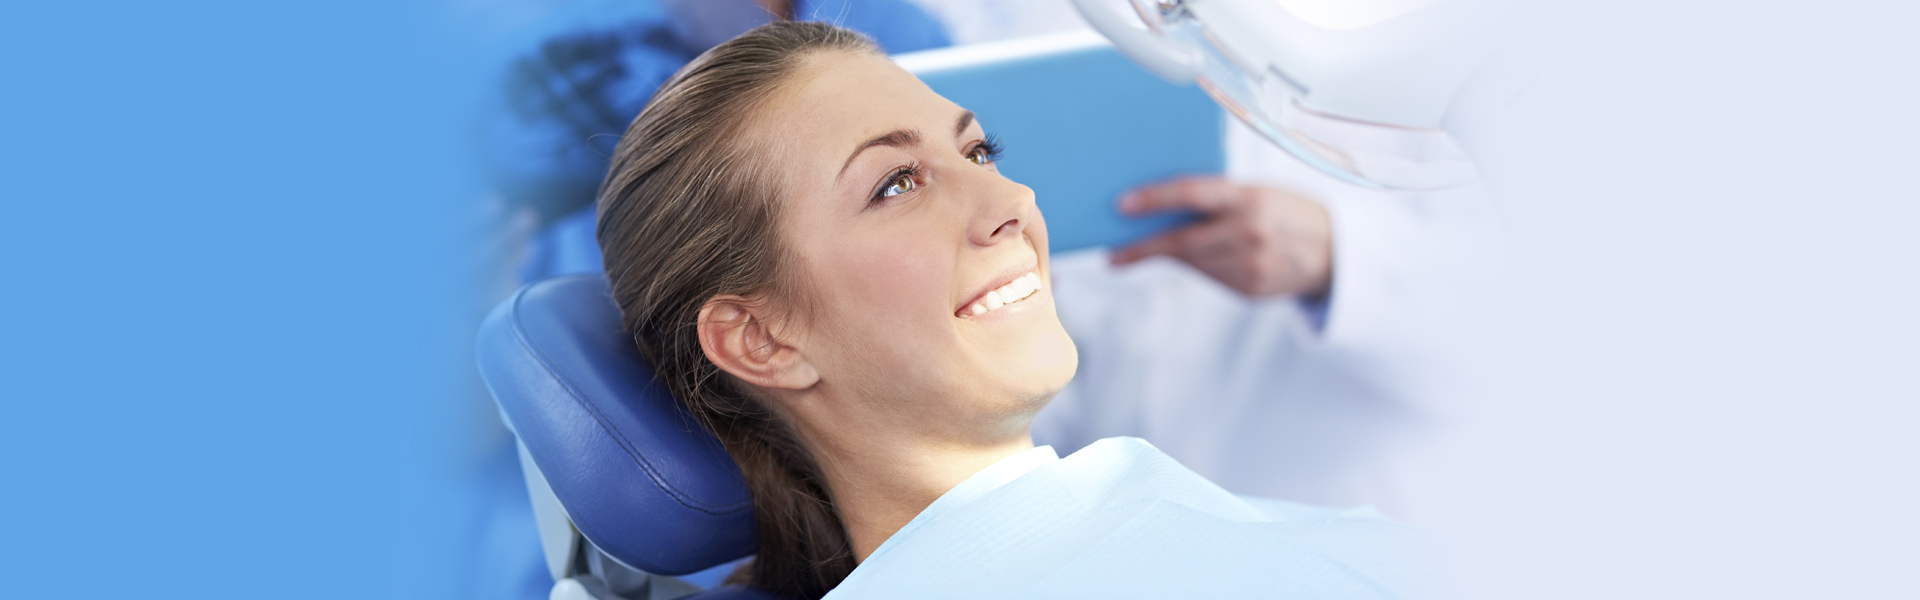 Everything You Should Know About IV Sedation Dentistry